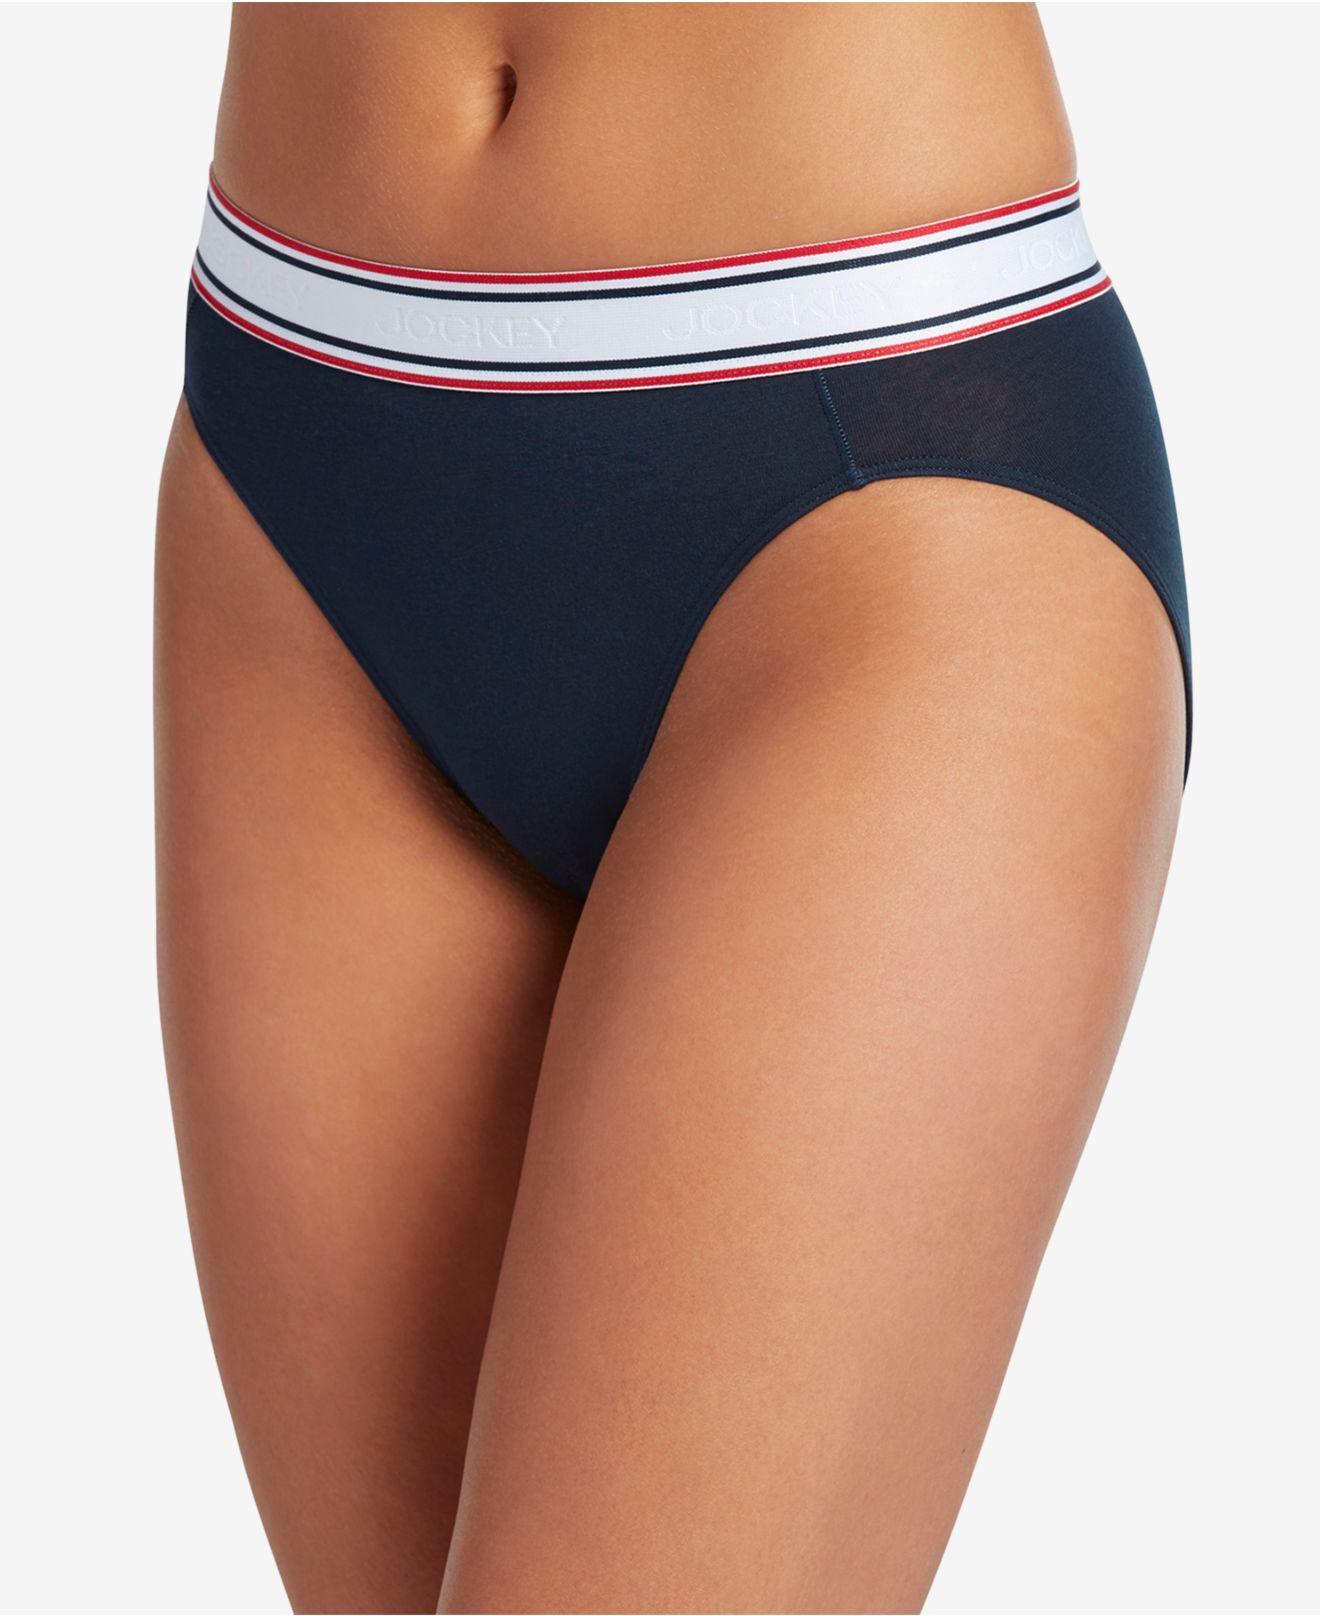 Jockey Retro Stripe Hi-cut Panty Underwear 2254, First At Macy's, Also  Available In Extended Sizes in Blue